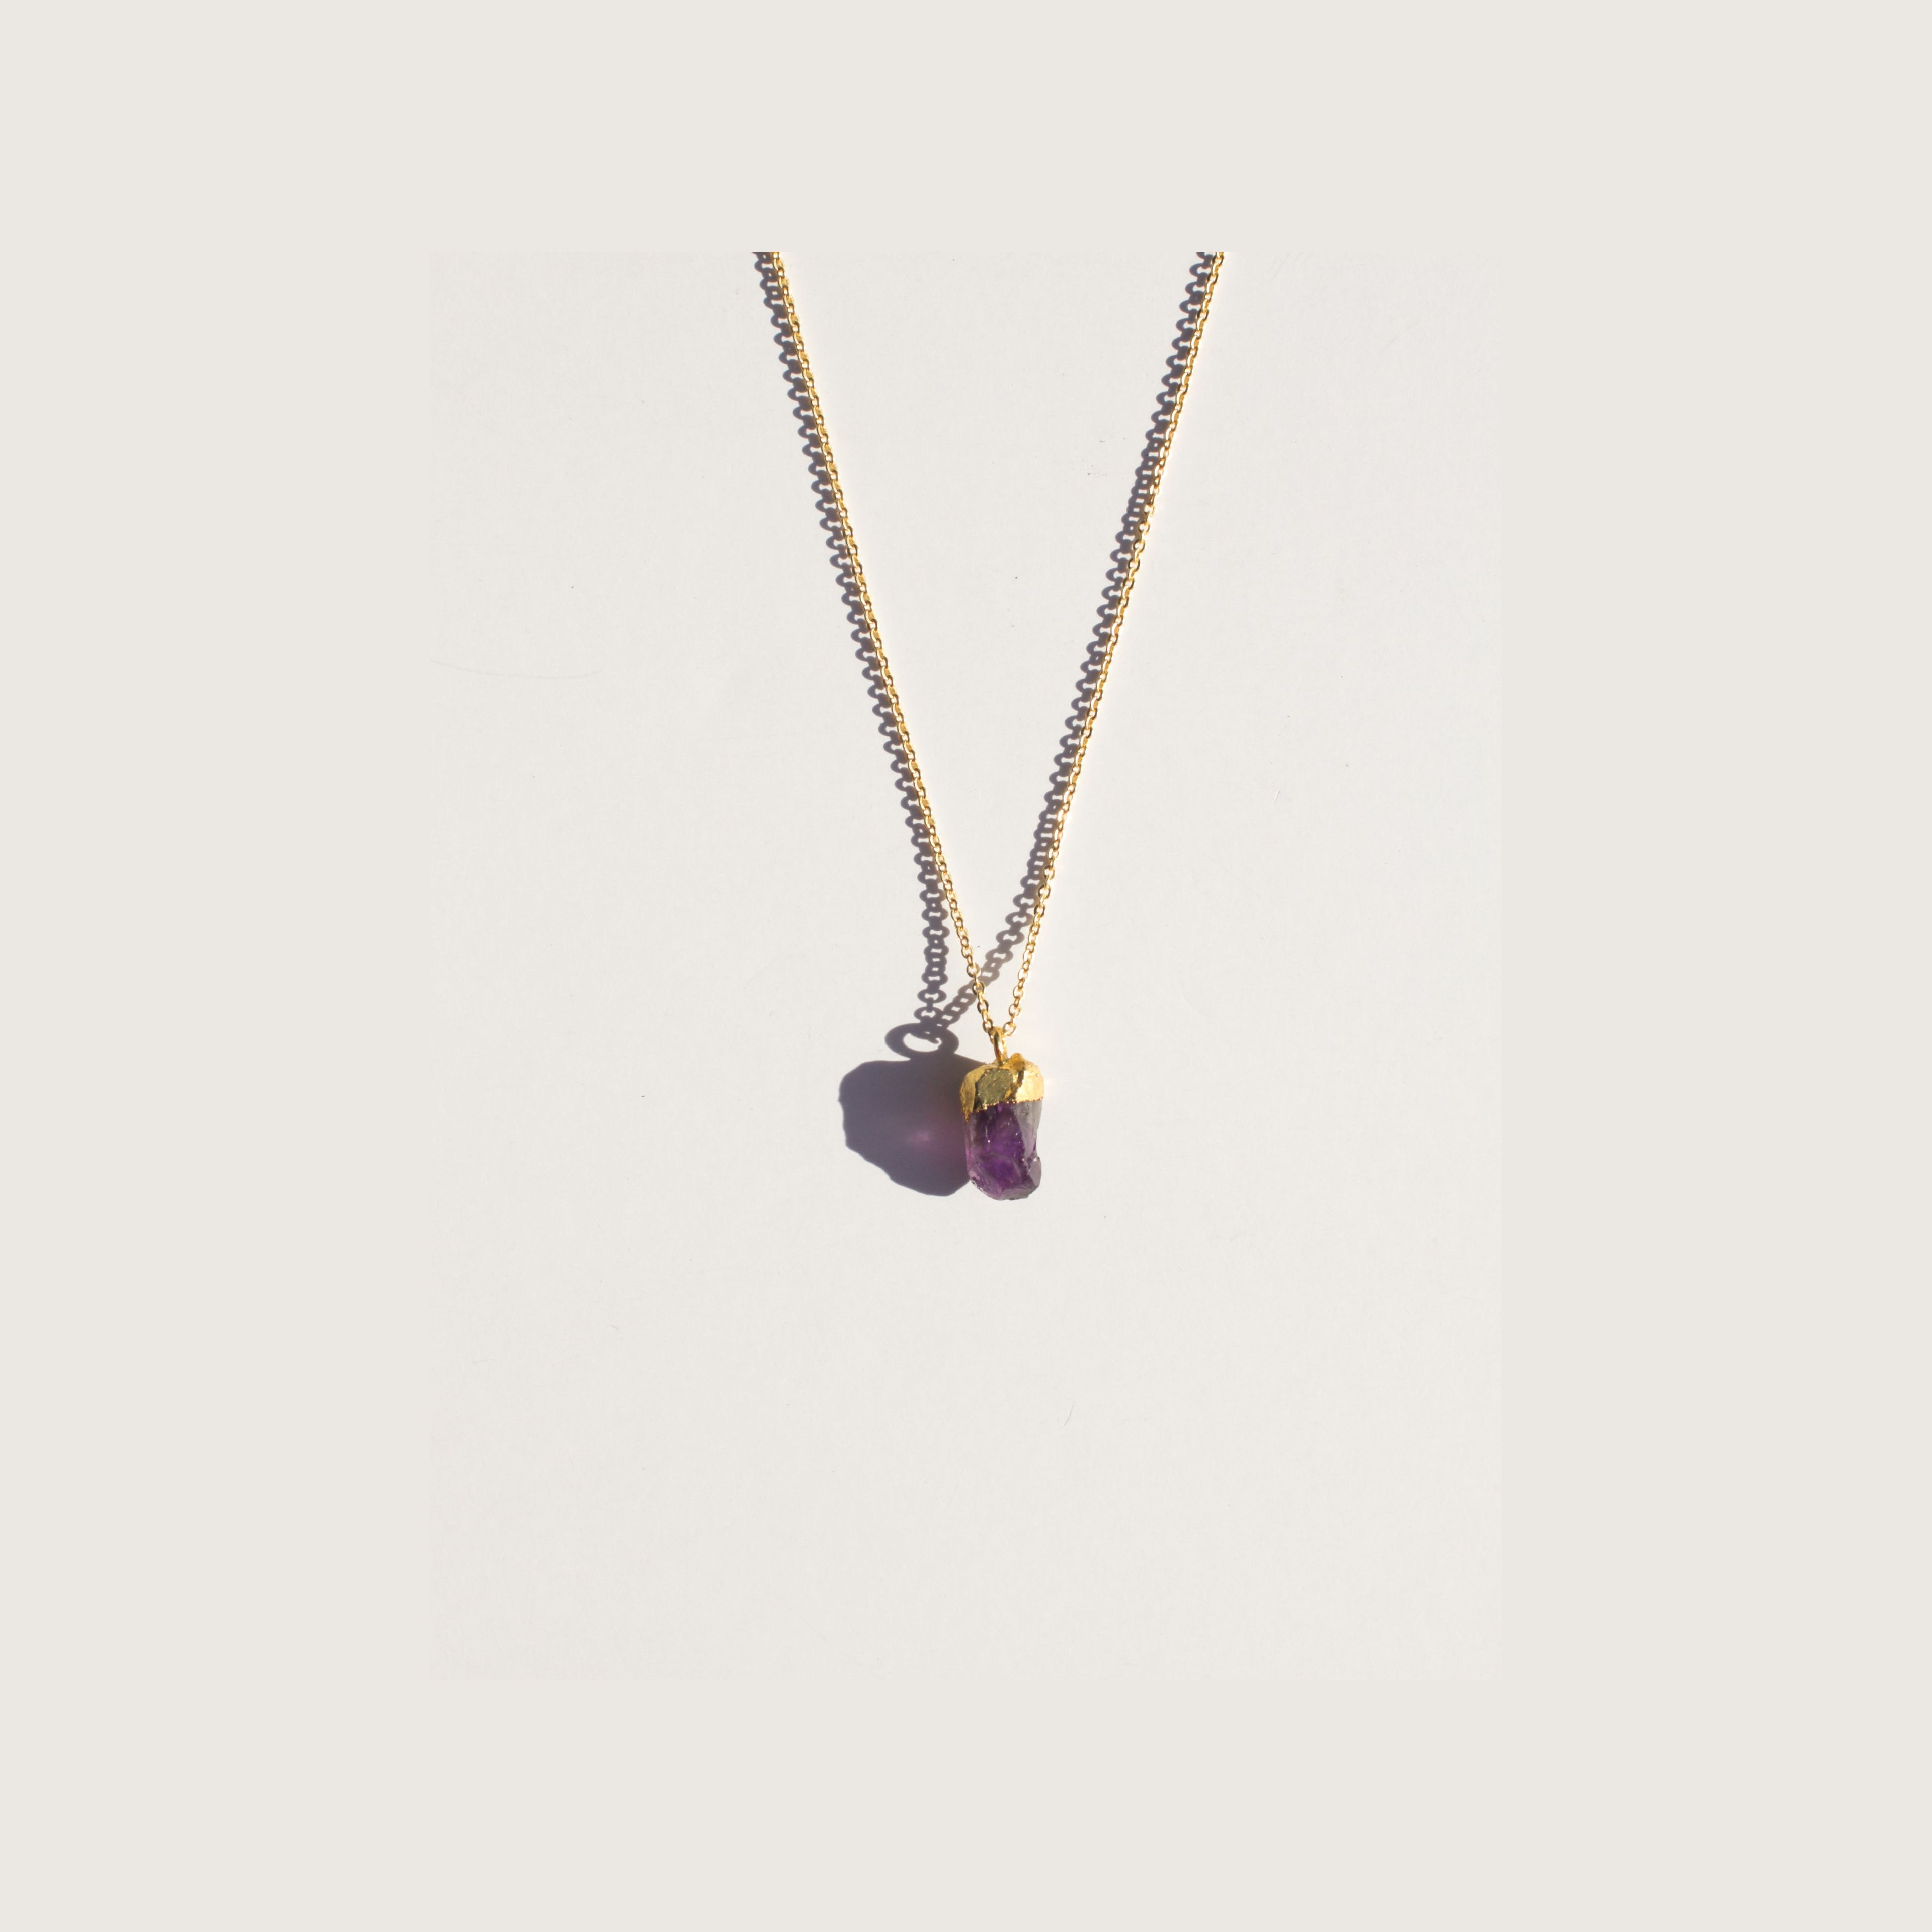 Raw Gemstone Necklace - Four Colors